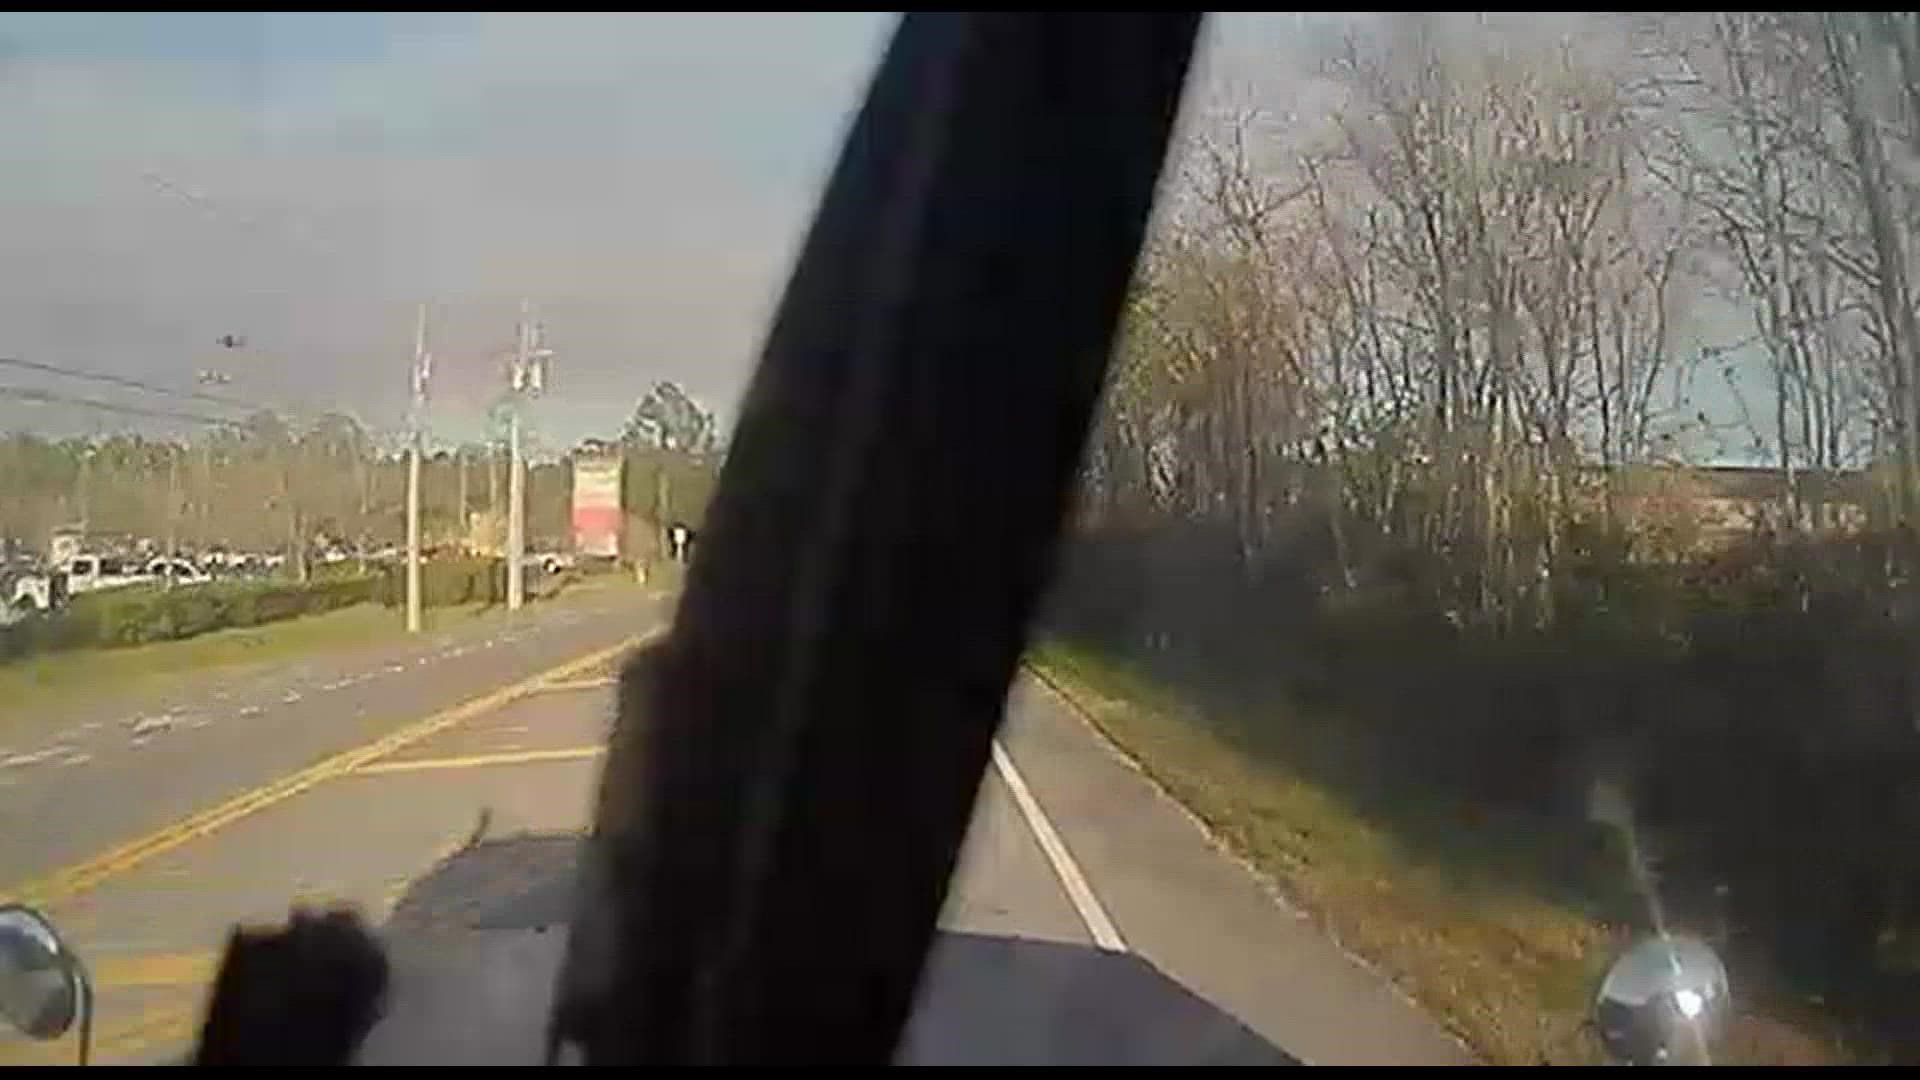 In the video, the truck hit a car that was making a left turn during a green light.